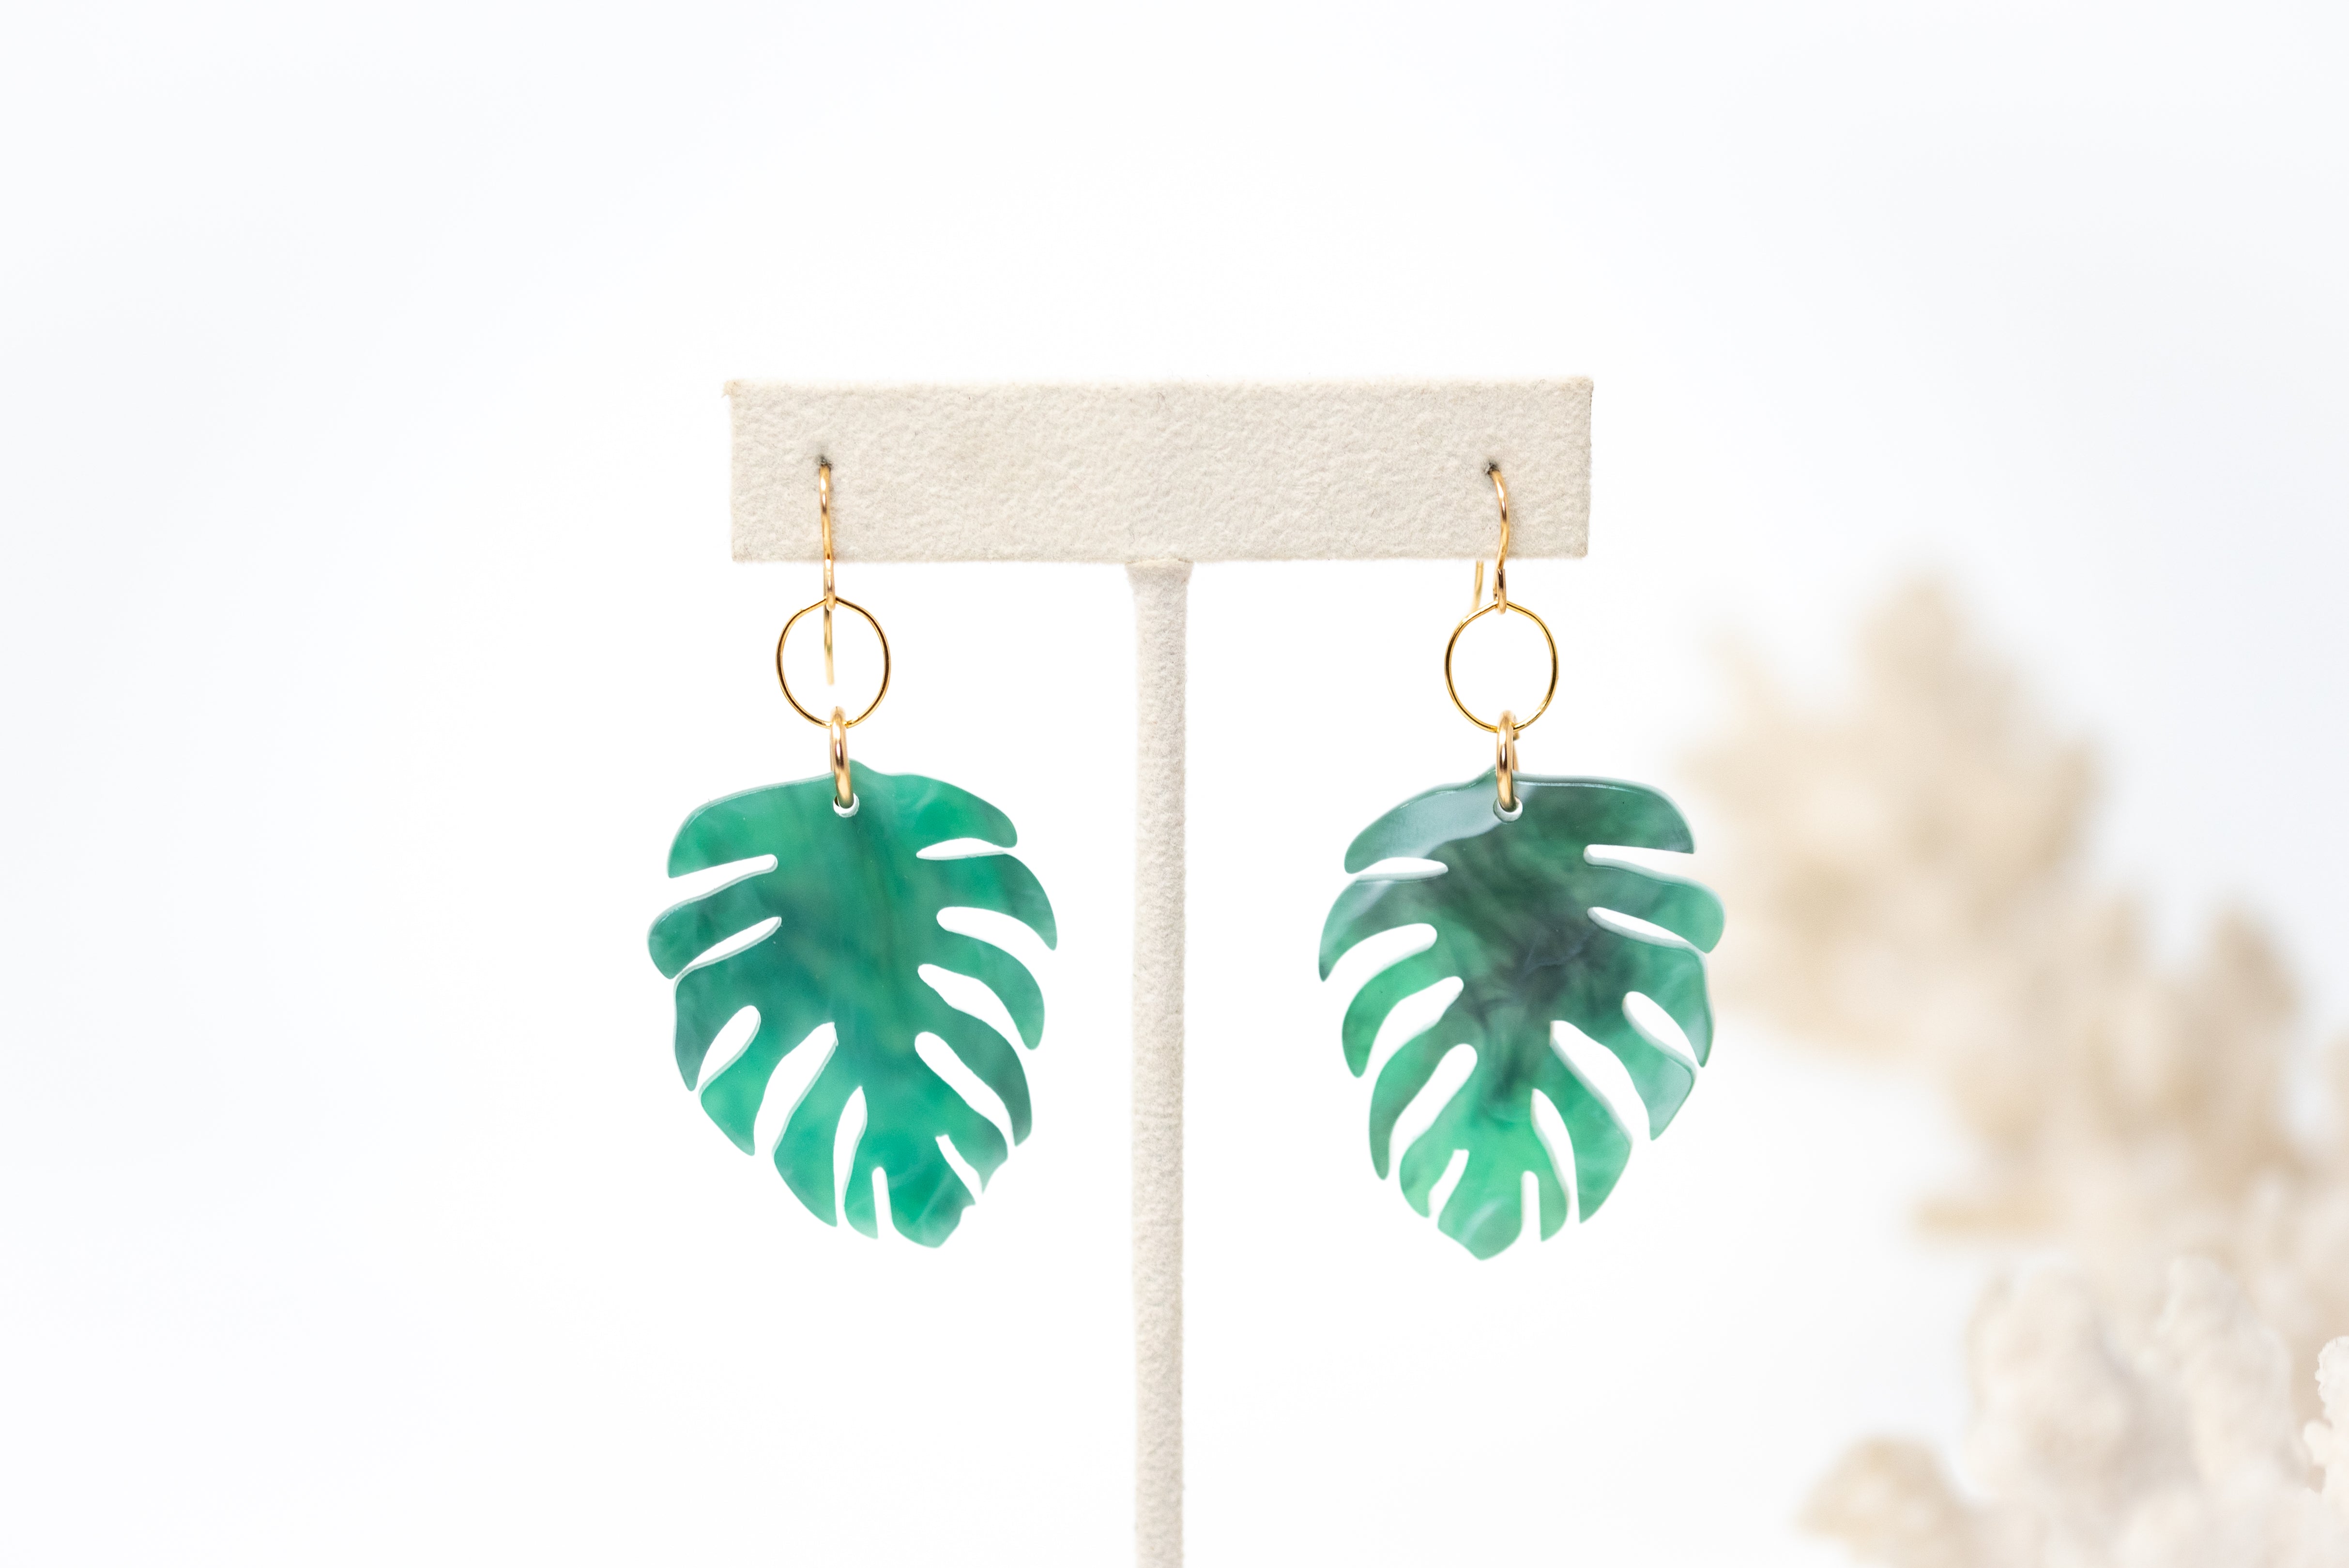 Green resin monstera leaf earrings around 1.5 inches long attached to a small gold circle.